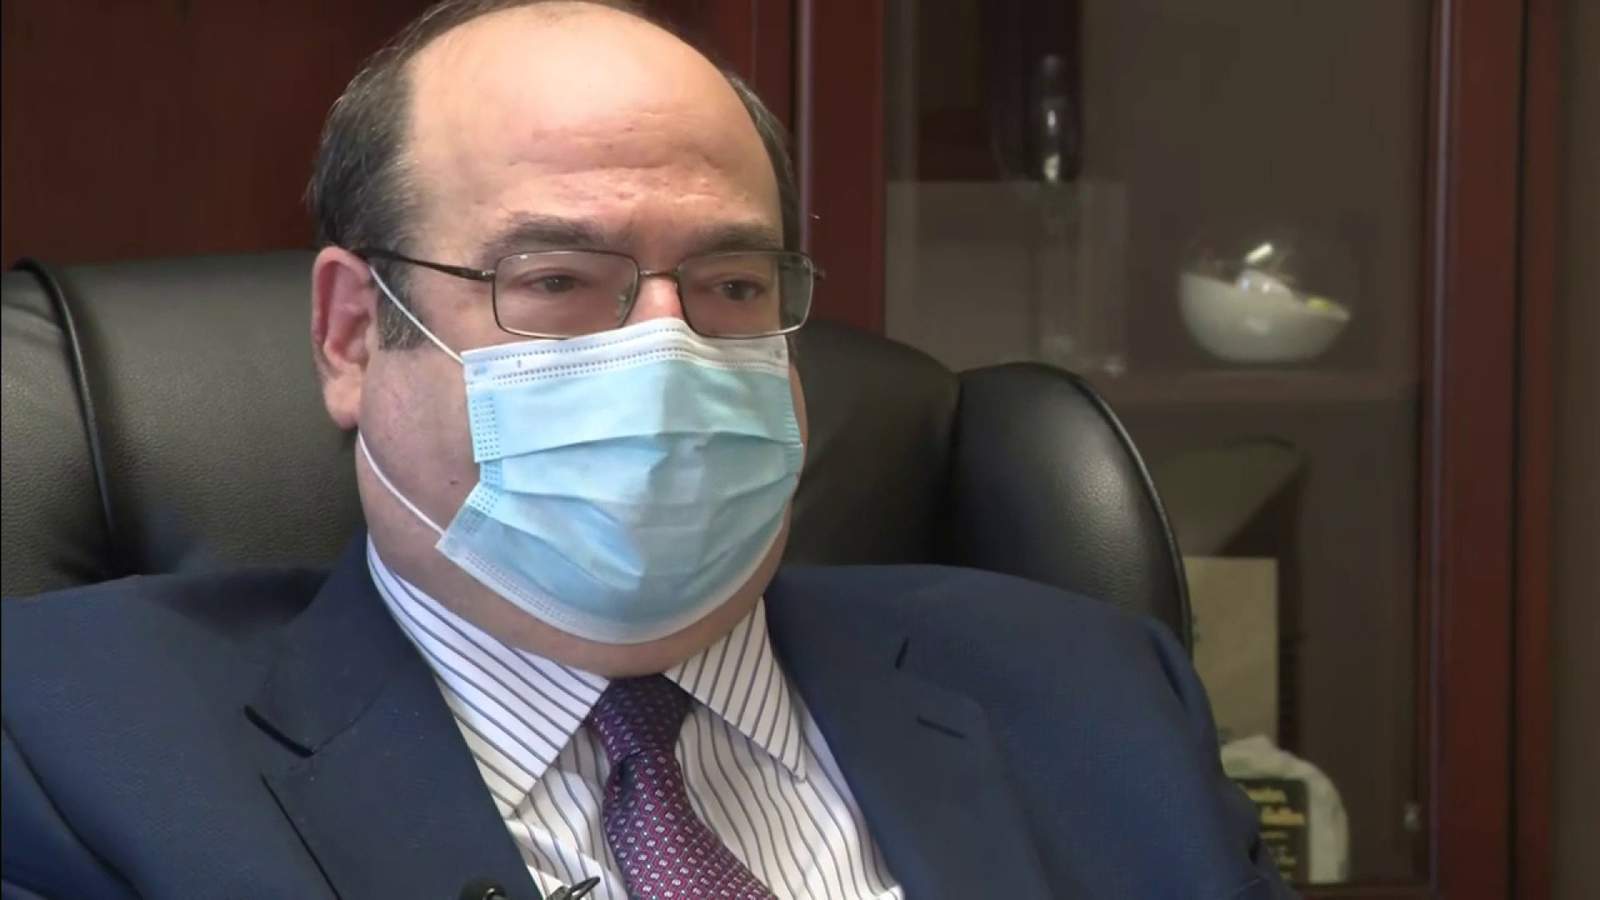 Broward mayor warns businesses must enforce face mask use or face consequences